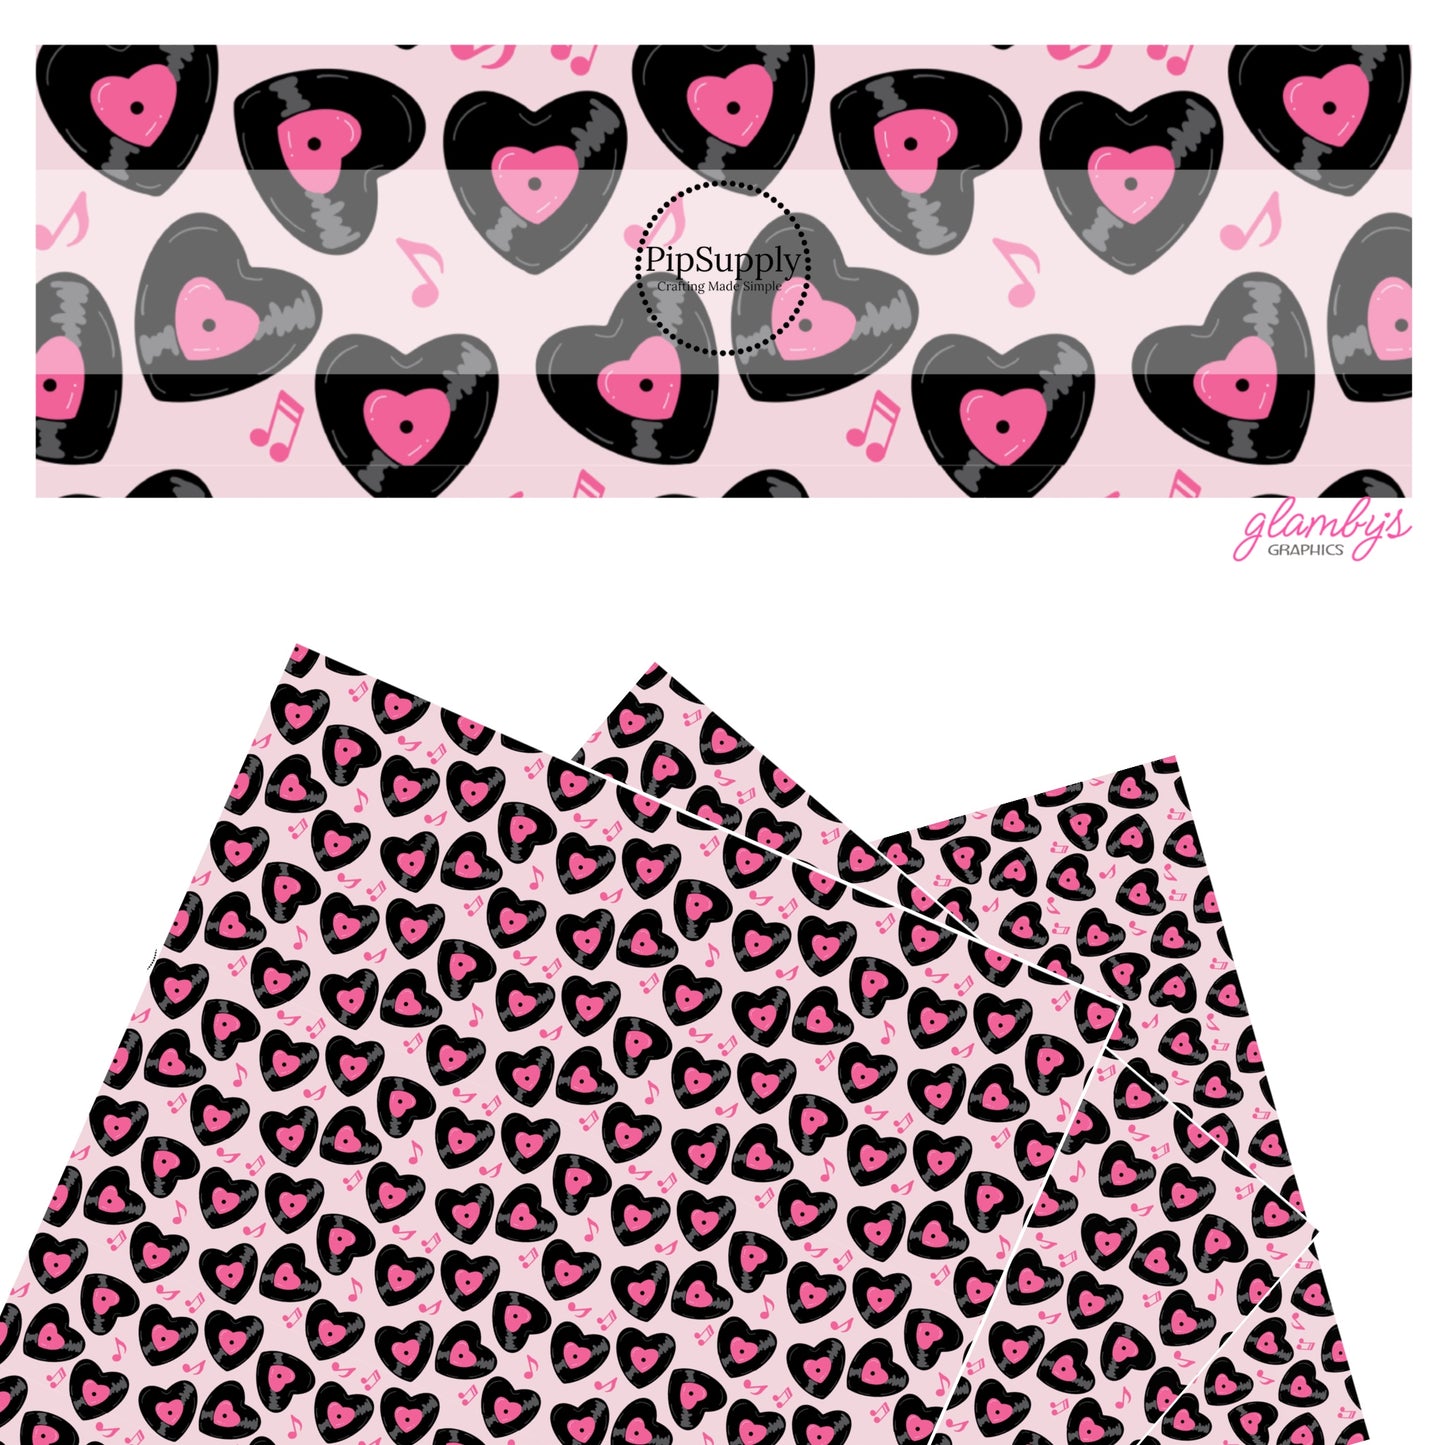 These Valentine's pattern themed faux leather sheets contain the following design elements: heart shaped vinyls surrounded by musical notes on pink. Our CPSIA compliant faux leather sheets or rolls can be used for all types of crafting projects.